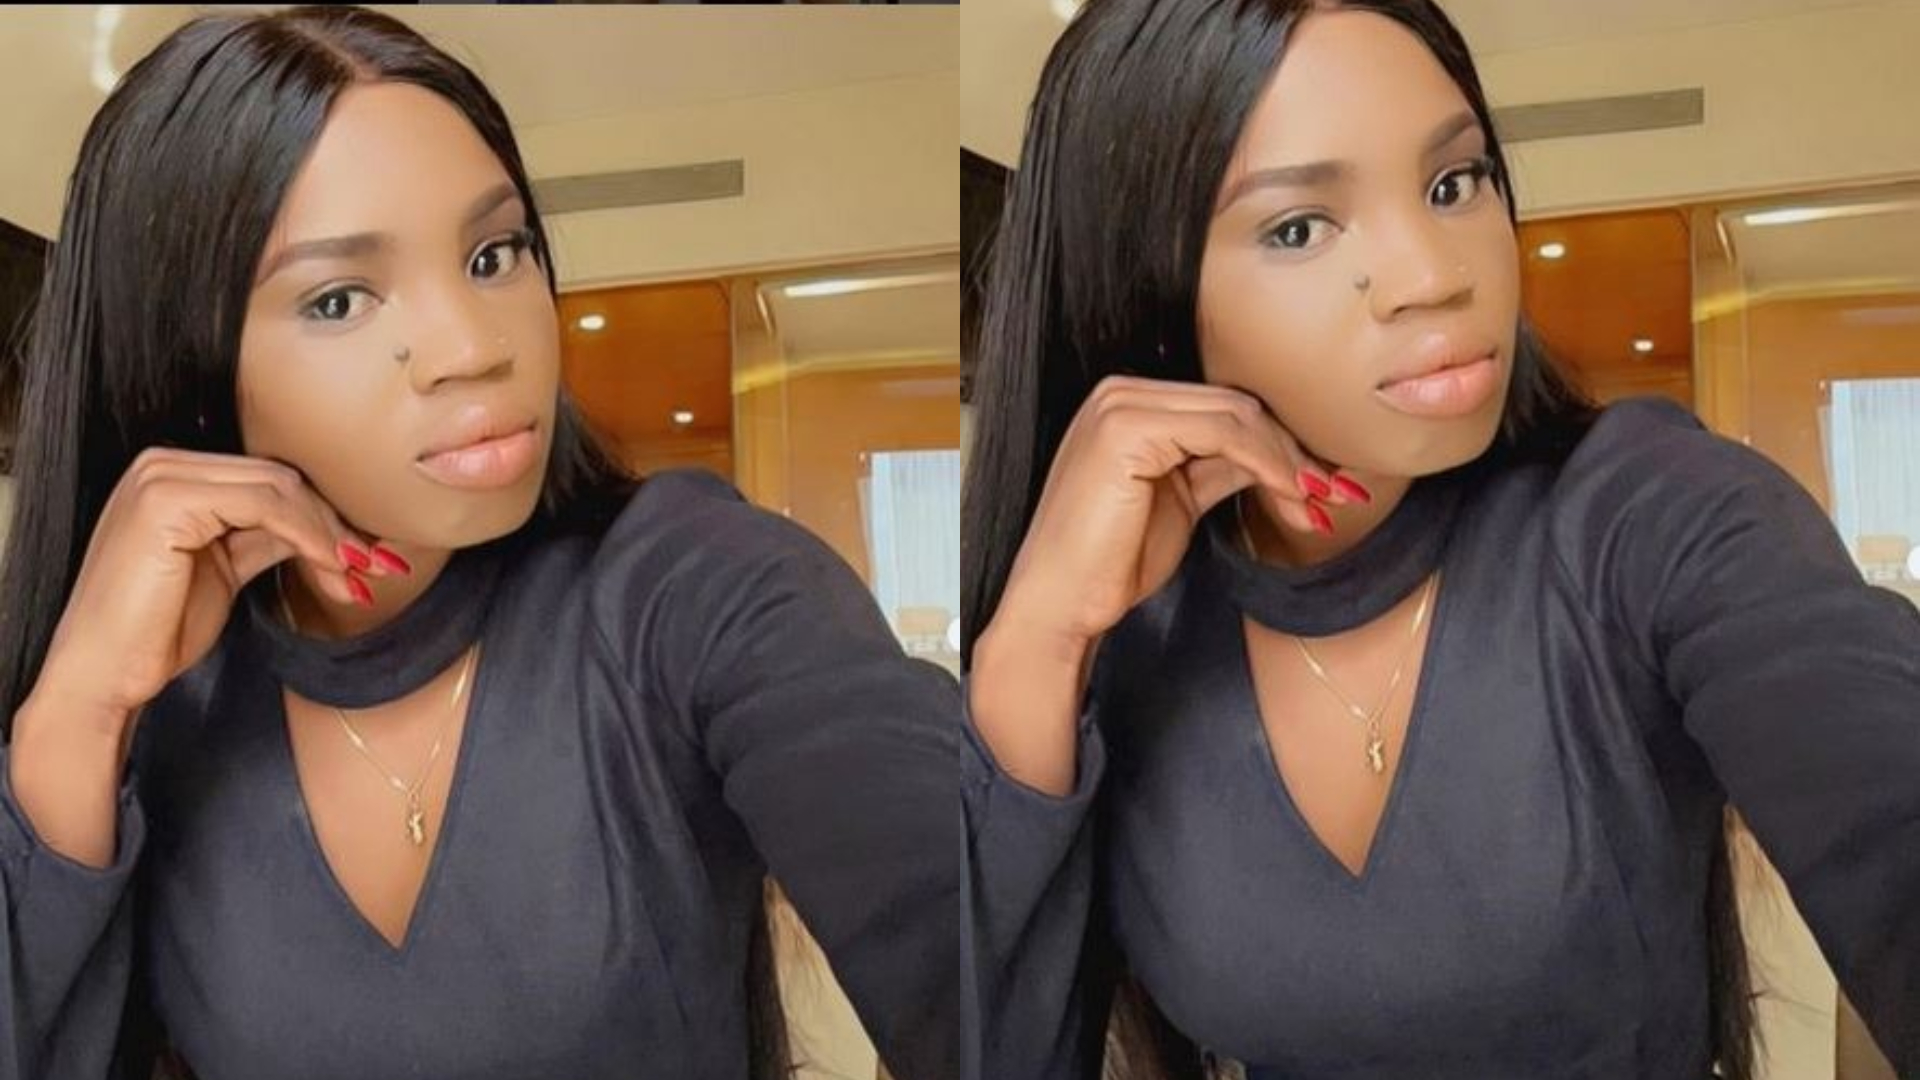 Female Comedian, Datwarrigirl recounts how her gender always try to ask her out on a date